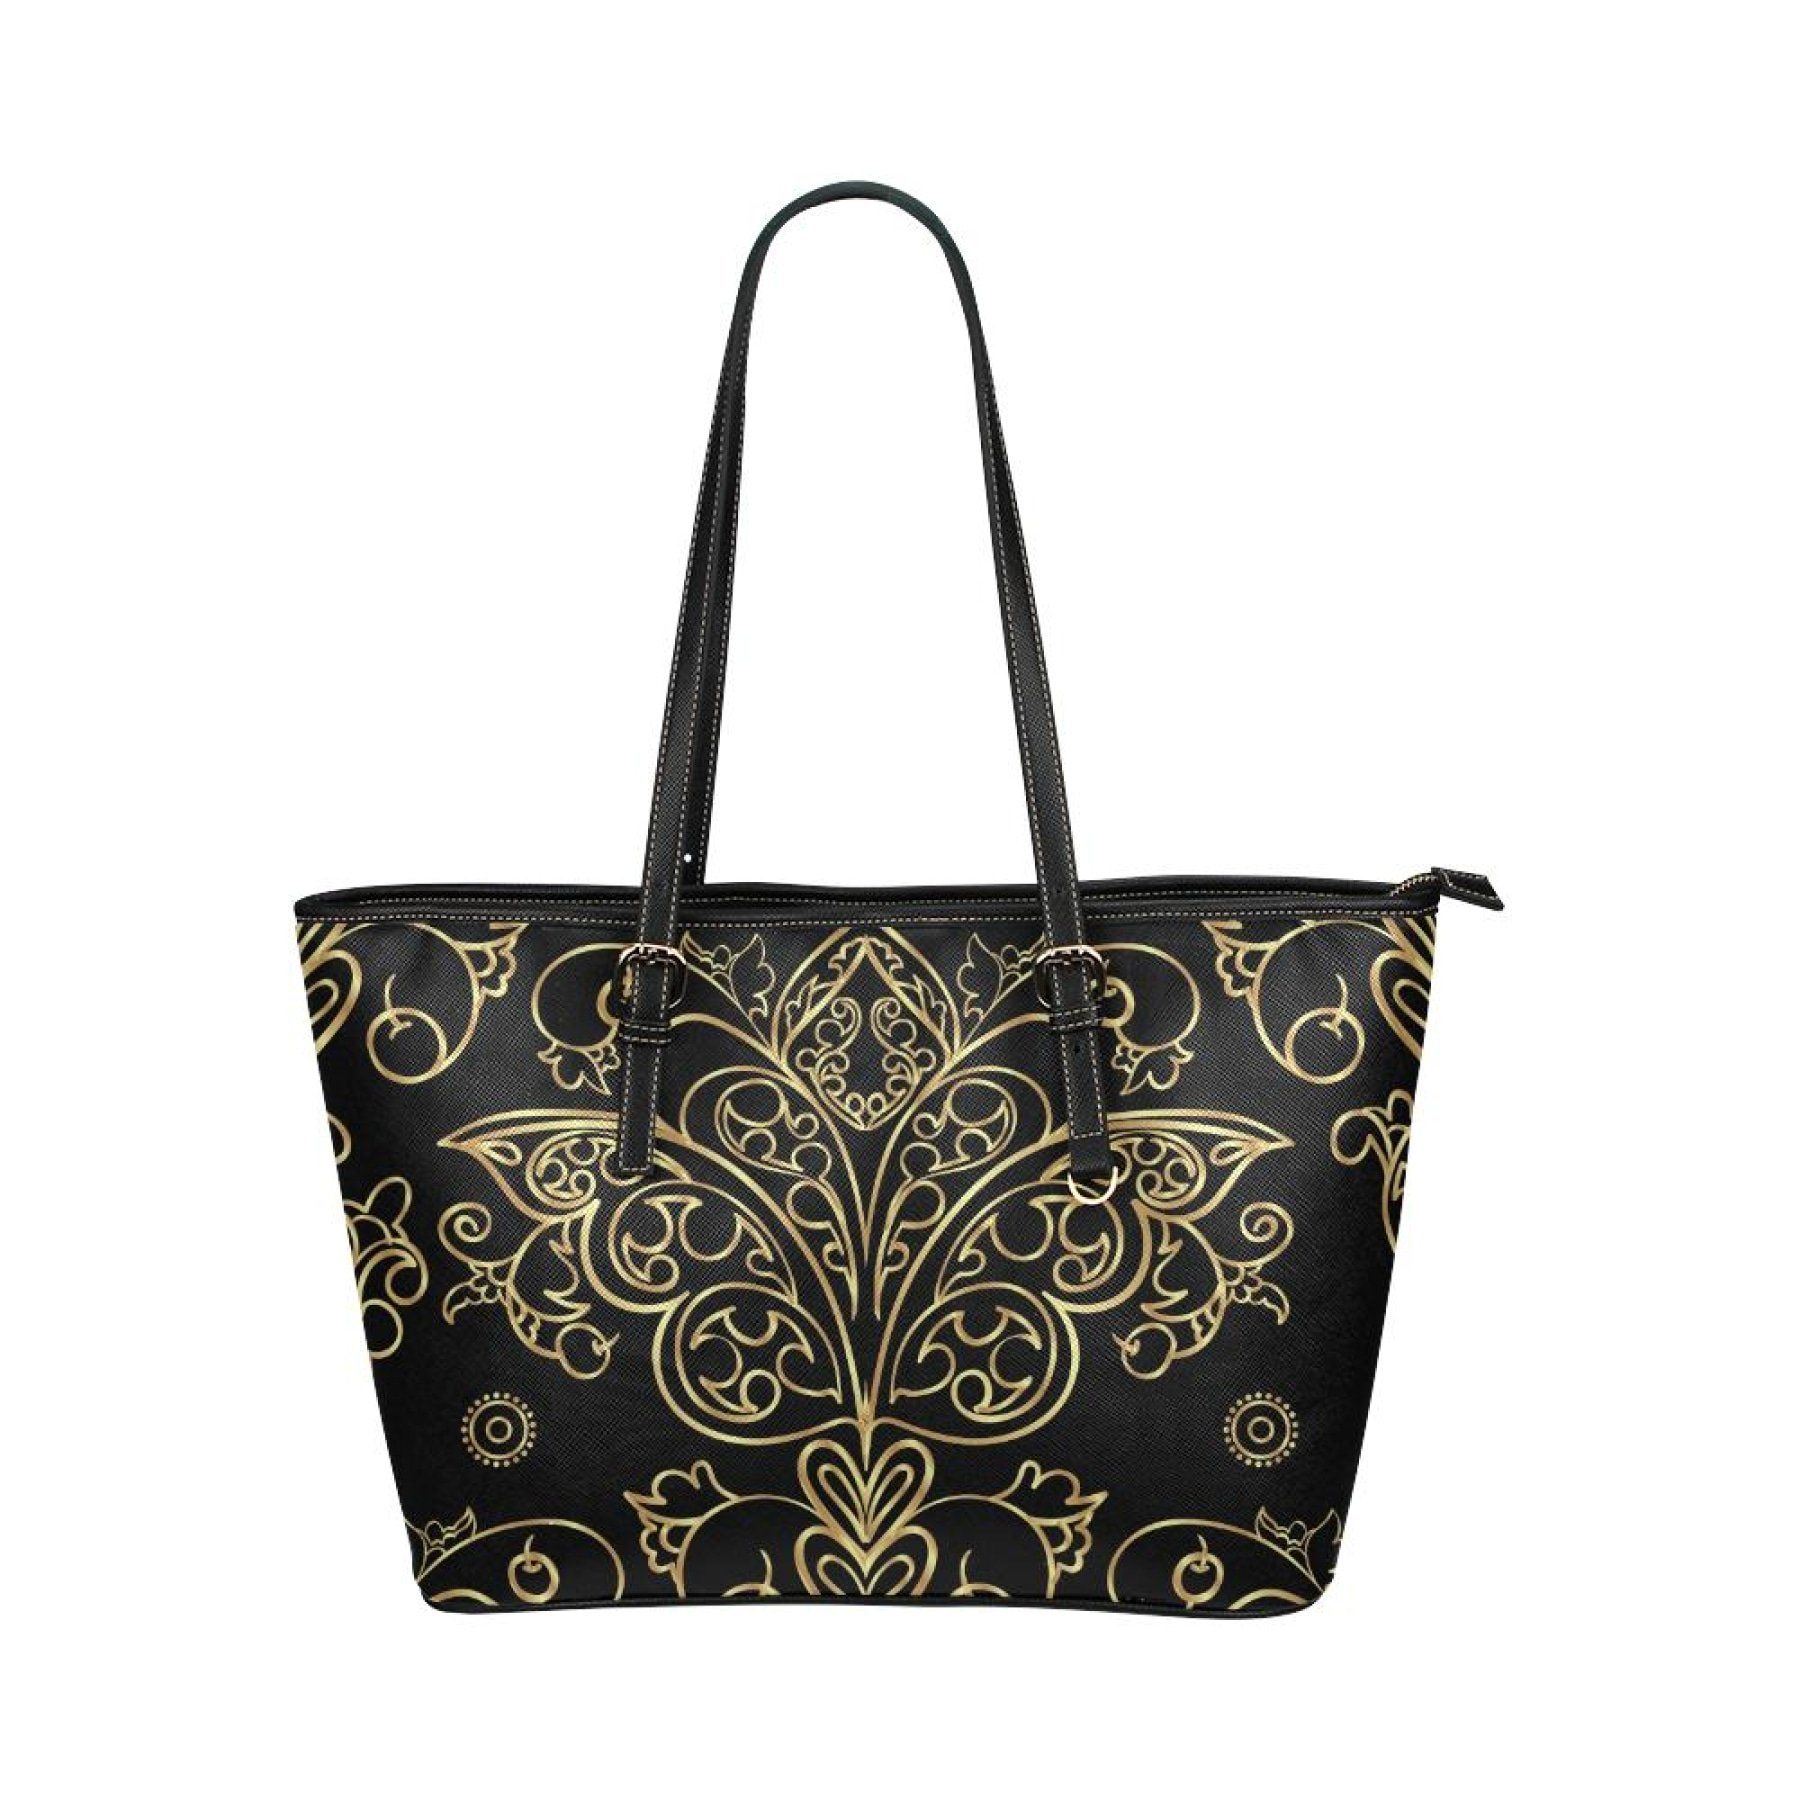 Black And Gold Vintage Butterfly Style Leather Tote Bag 15